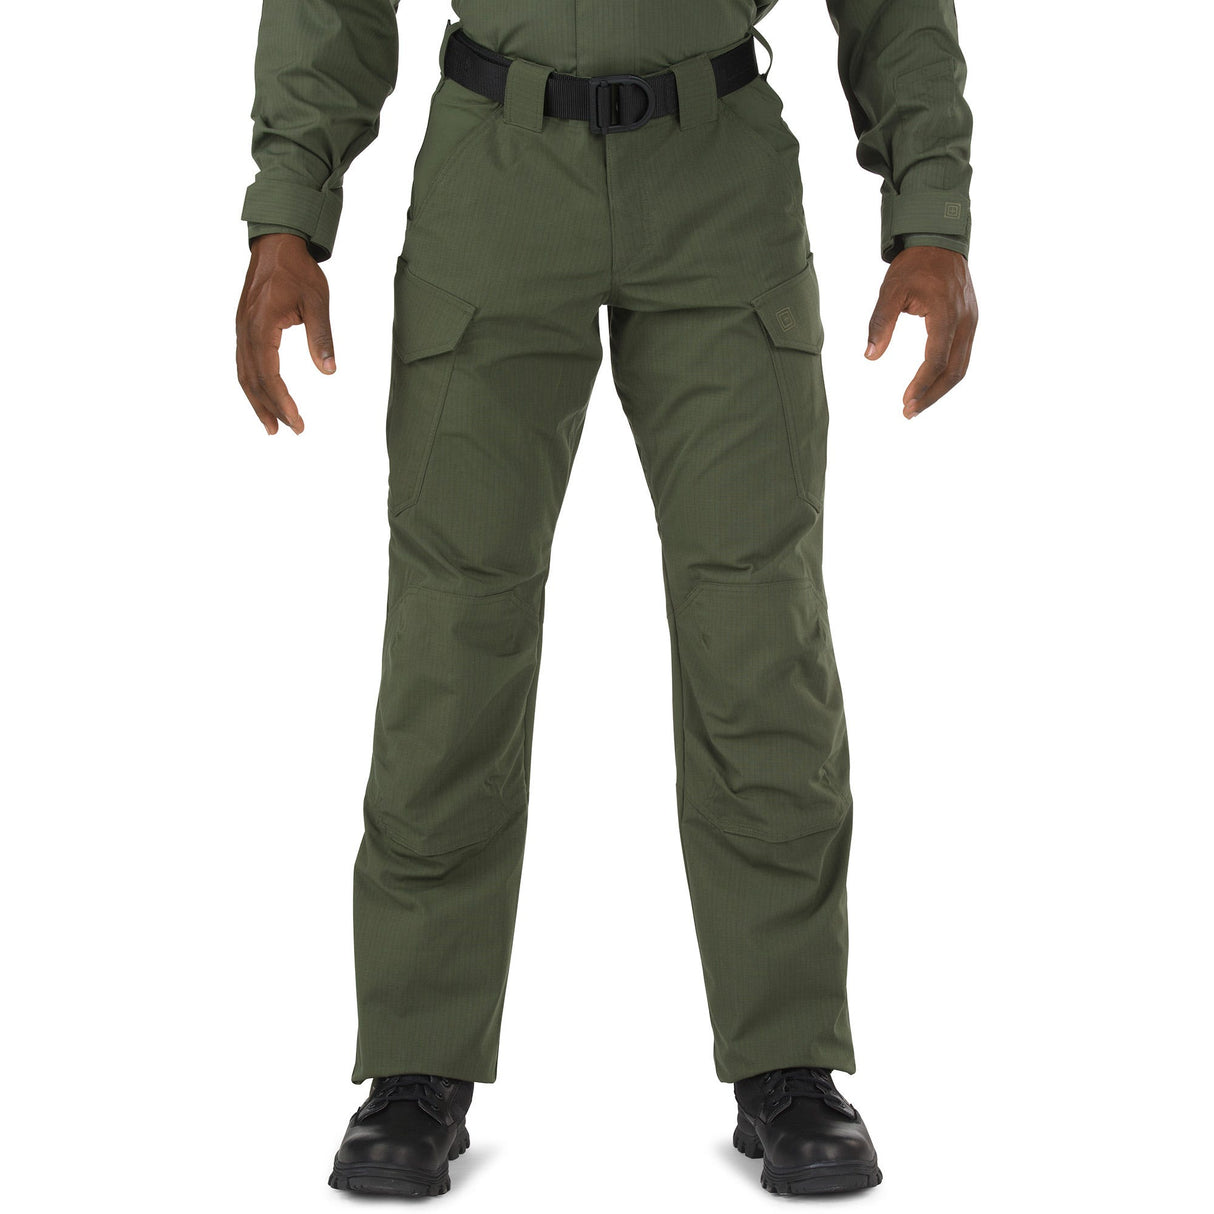 Versatile Tactical Pant: Suitable for a range of activities and environments.